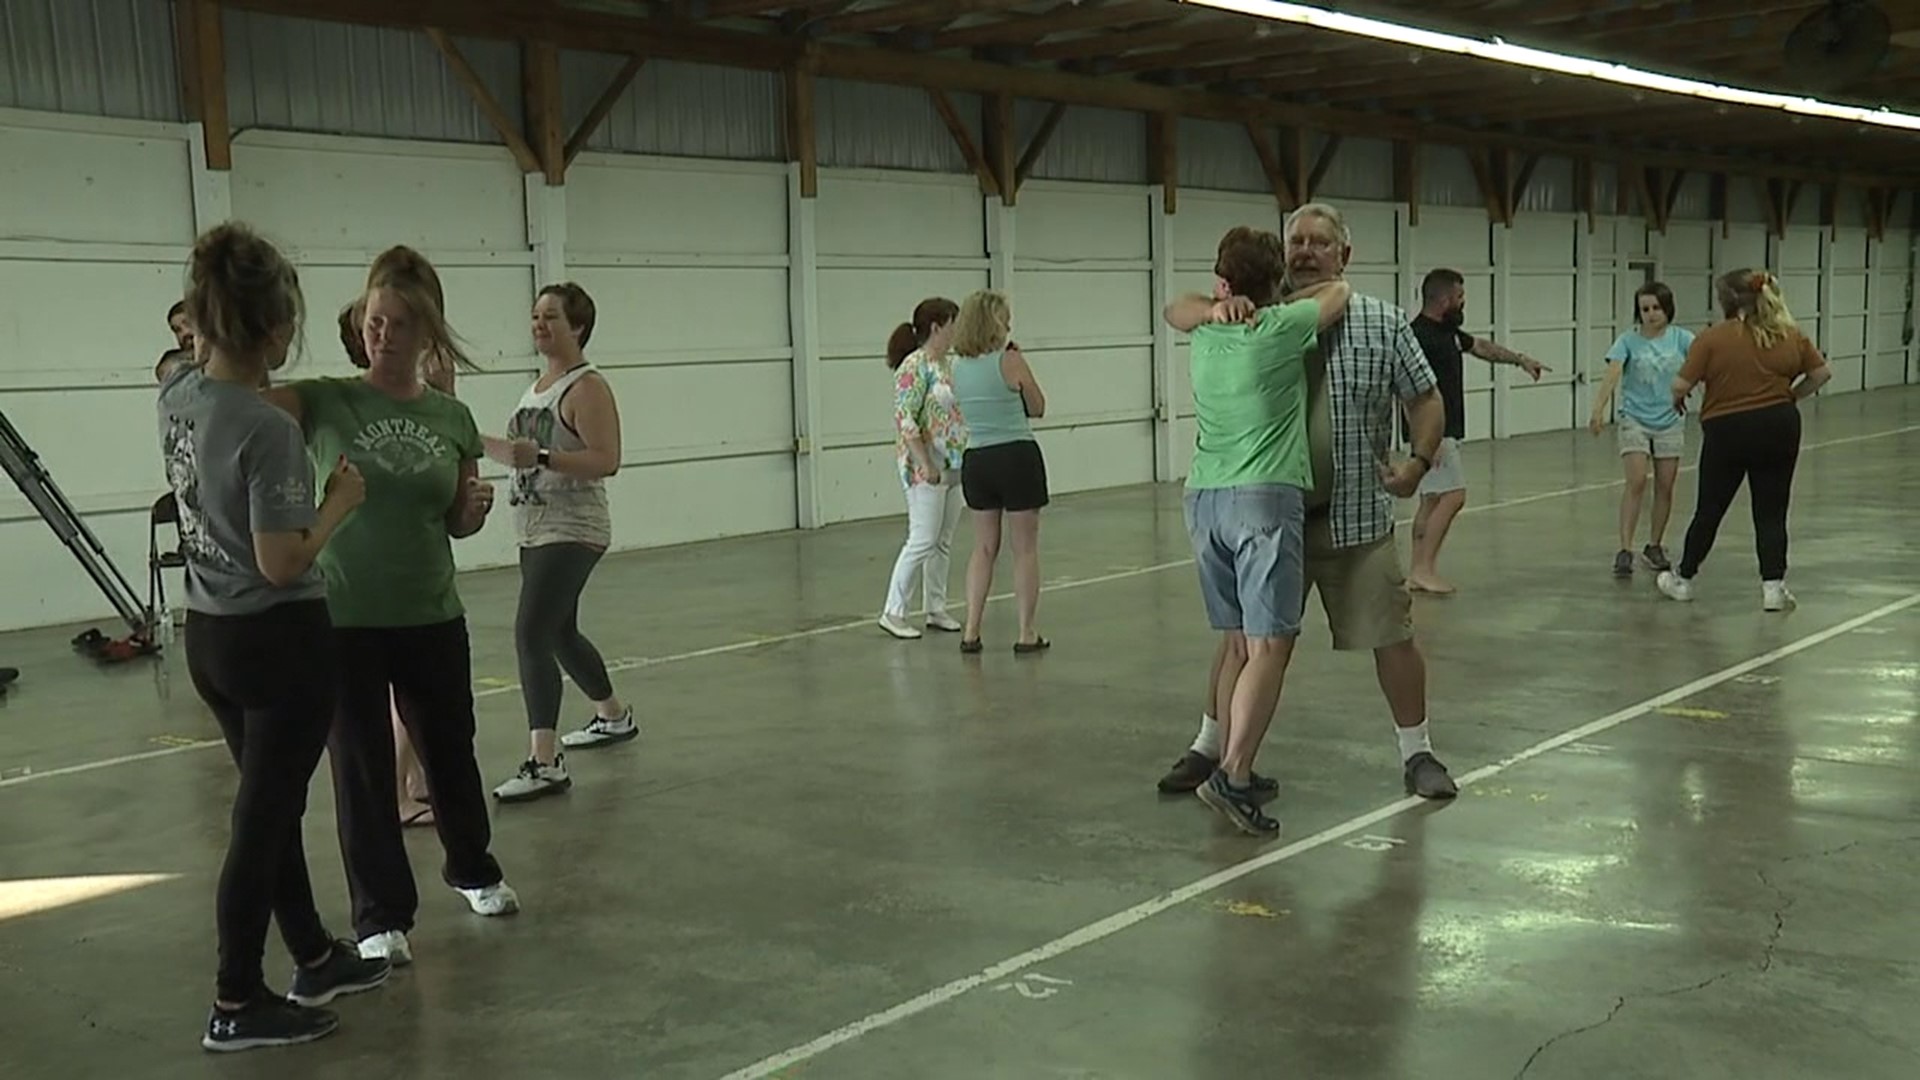 More and more people around the country and here in Pennsylvania are taking steps to protect their safety. An organization is offering free self-defense classes.